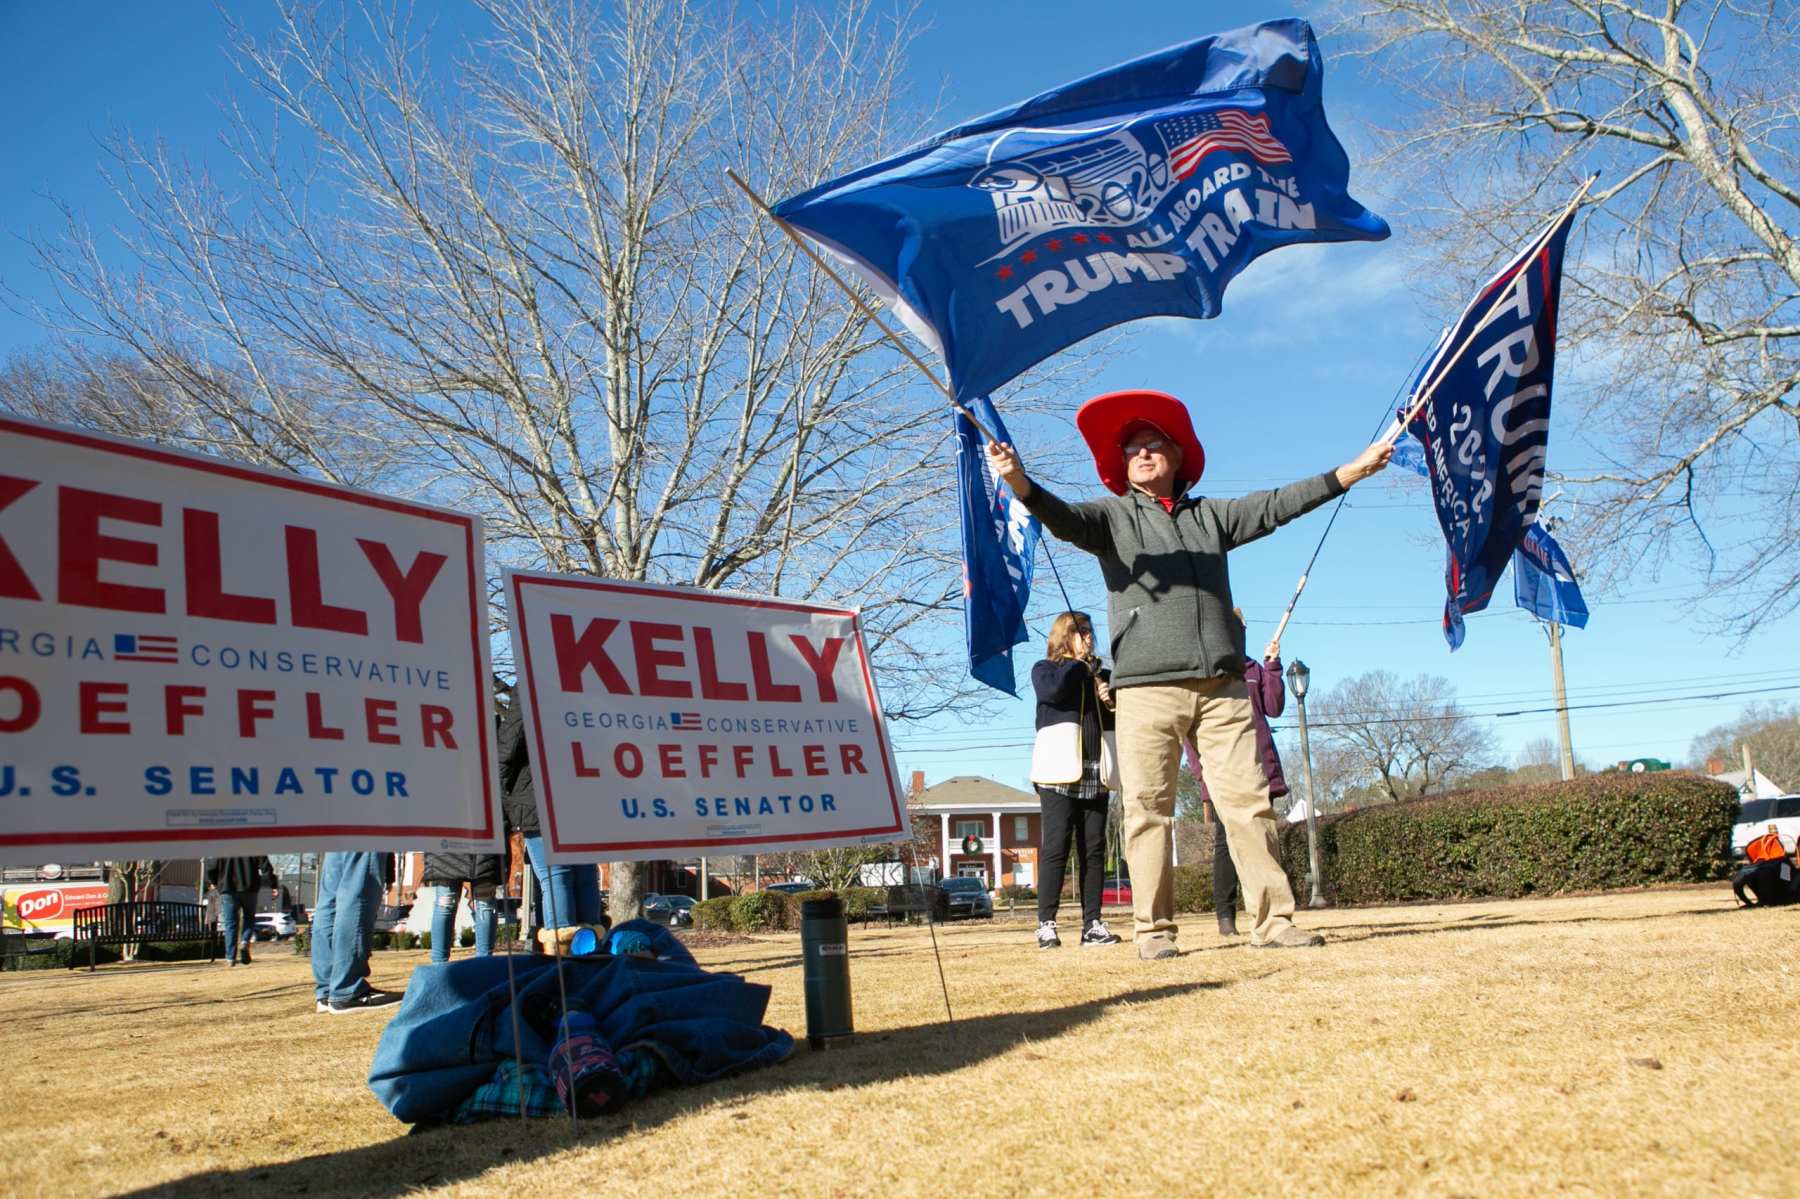 WOODSTOCK, GA - DECEMBER 29: Gary White waves Trump flags during a Senate Firewall campaign rally for Sen. Kelly Loeffler (R-GA) at The Park at City Center on December 29, 2020 in Woodstock, Georgia. Loeffler faces Democratic Senate candidate Raphael Warnock in the runoff election that will determine control of the U.S. Senate. With a week until the January 5th runoff election, candidates continue to campaign throughout Georgia. (Photo by Jessica McGowan/Getty Images)